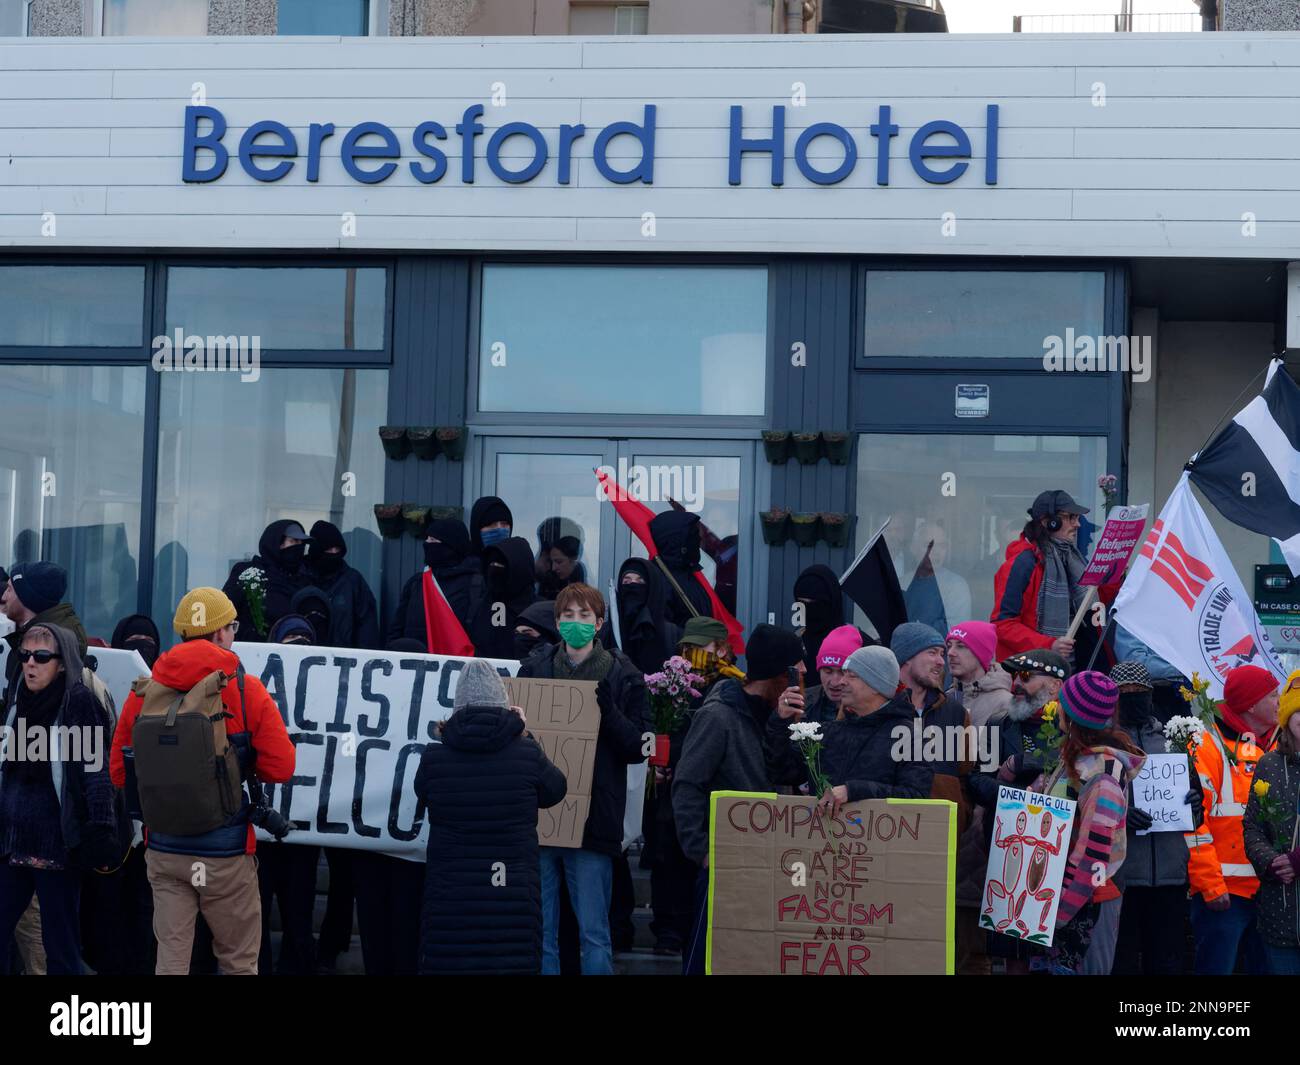 The seafront Hotel Beresford. A Demonstration organised by a right wing group Reform UK against asylum seekers takes place. An undisclosed number of migrants are housed by the home office in the 100 bedroom seaside hotel in Newquay. The hotel is owned by the Bespoke group of hotels and was offered to the Home office for this purpose. Although officially a temporary measure, while the home office processes asylum applications, many of the residents have been here since November 2022. A far larger group of anti Fascist counter demonstrators are also present with placards and flowers confronting Stock Photo